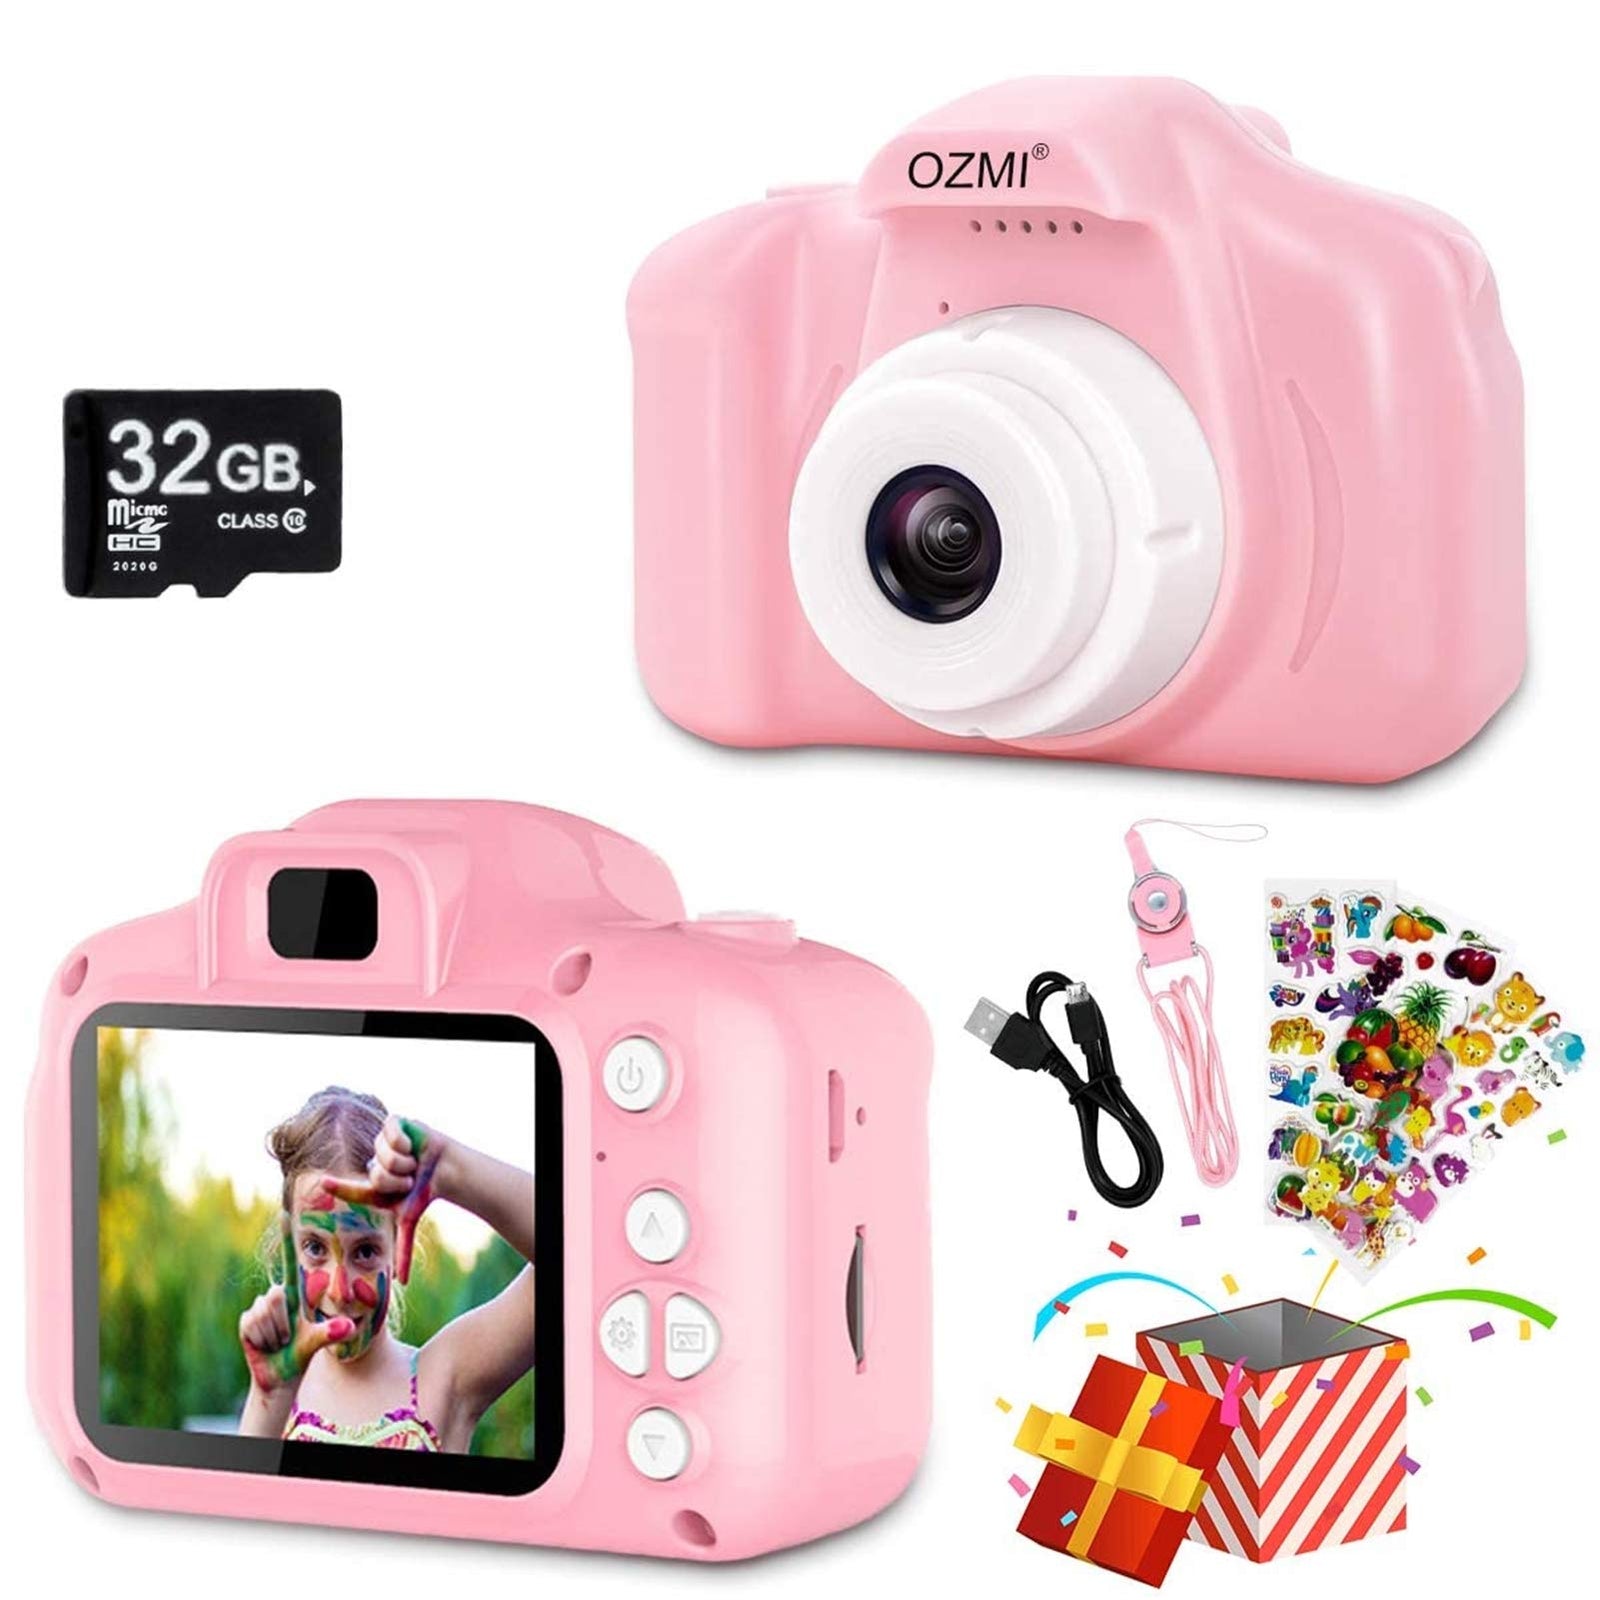 OZMI Upgrade Kids Selfie Camera, Christmas Birthday Gifts for Girls Age 3-12, Children Digital Cameras 1080P 2 Inch Toddler, Portable Toy for 3 4 5 6 7 8 9 10 Year Old Girls with 32GB SD Card (Pink)